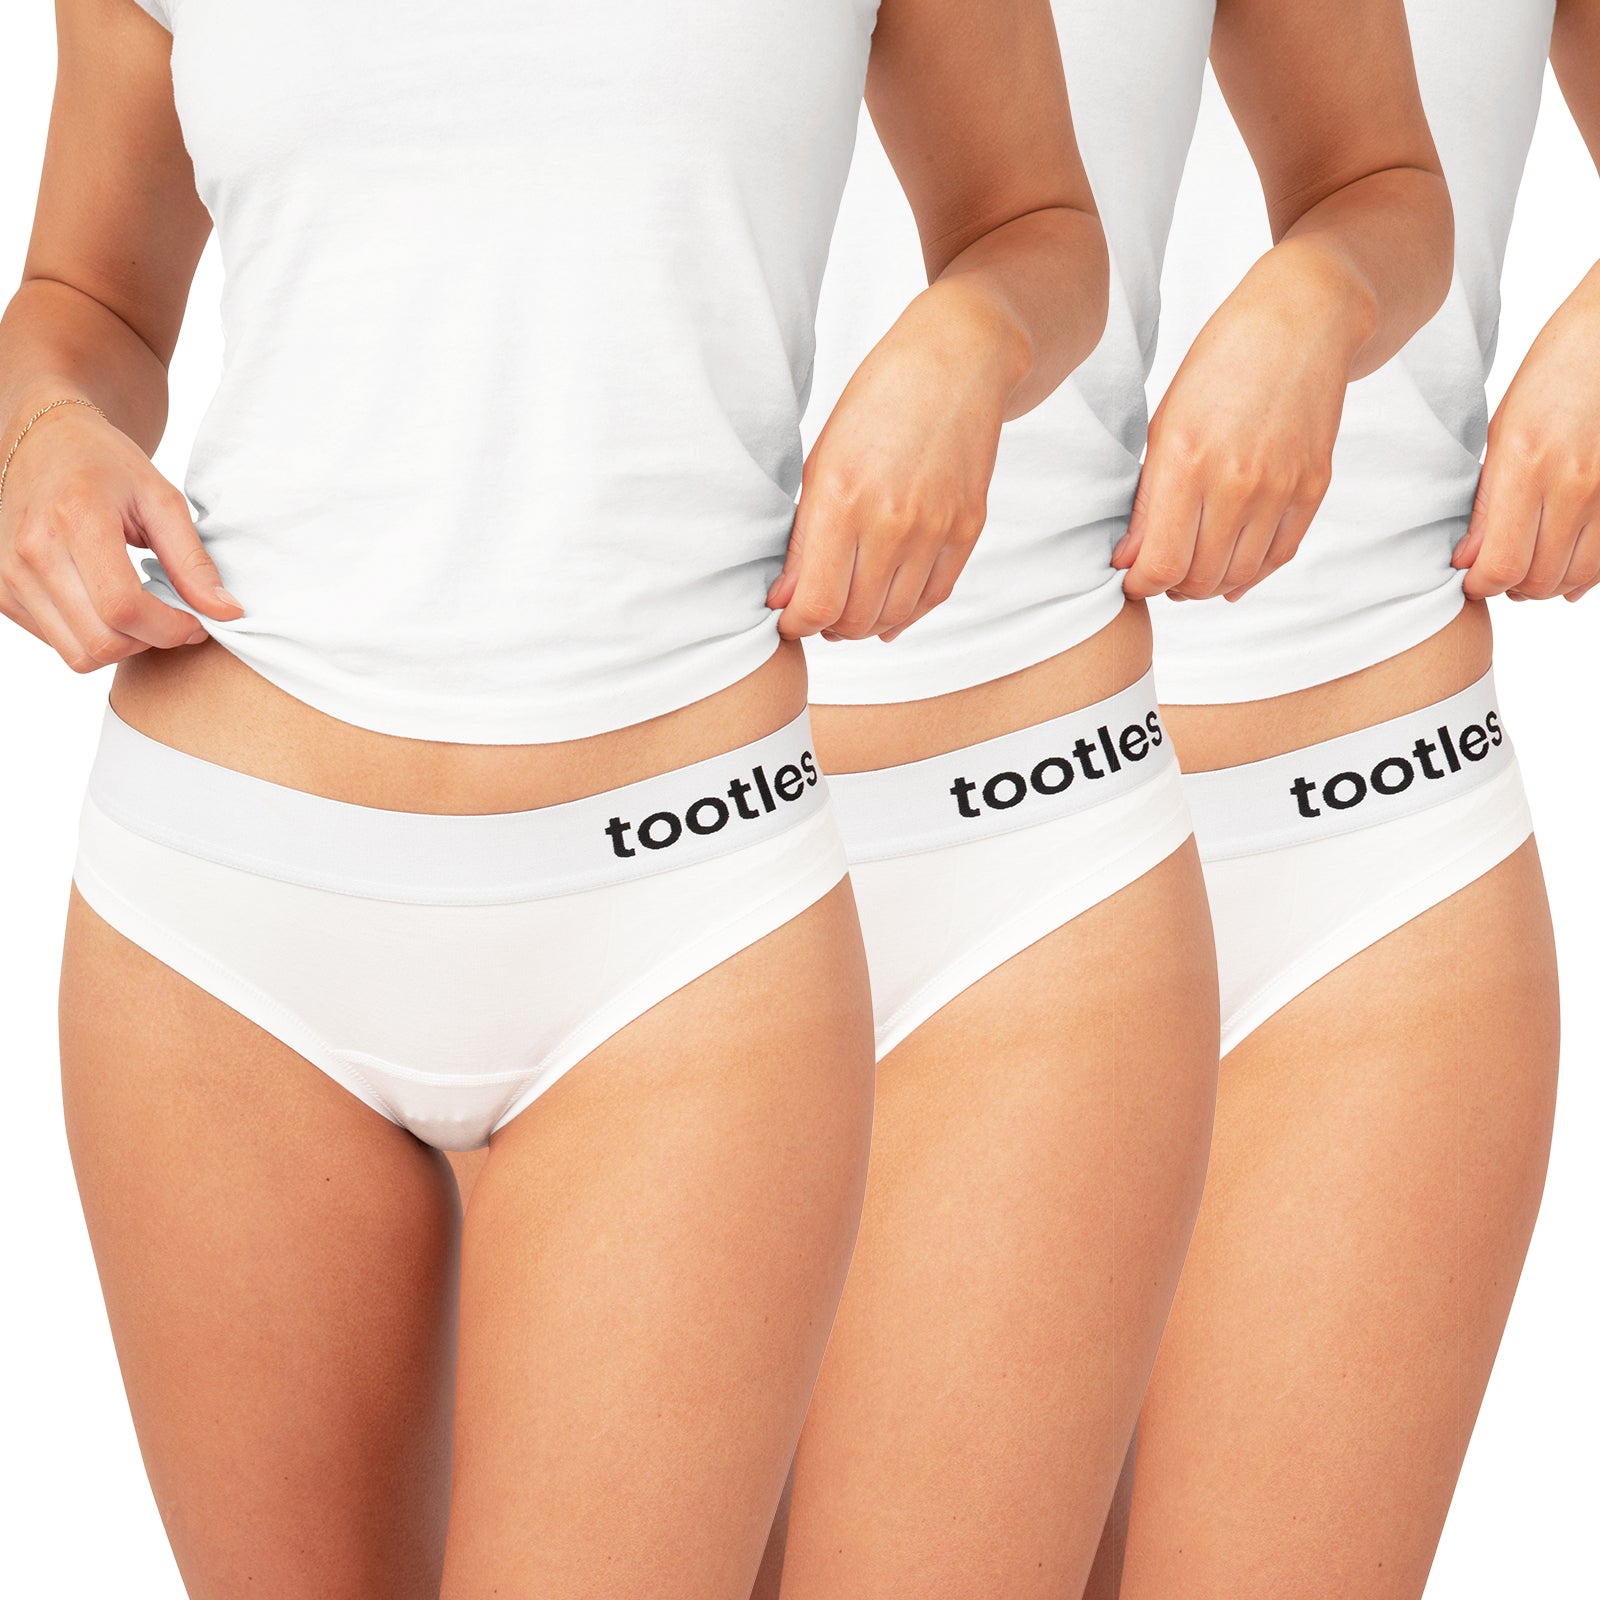 Tootles - Ready for the only leakproof underwear that checks every box?  Tootles DRY 🍃💨 ✔️ Absorbs ✔️ Dries ✔️ Filters odor . . . . . . . .  #Tootles #TootlesUnderwear #